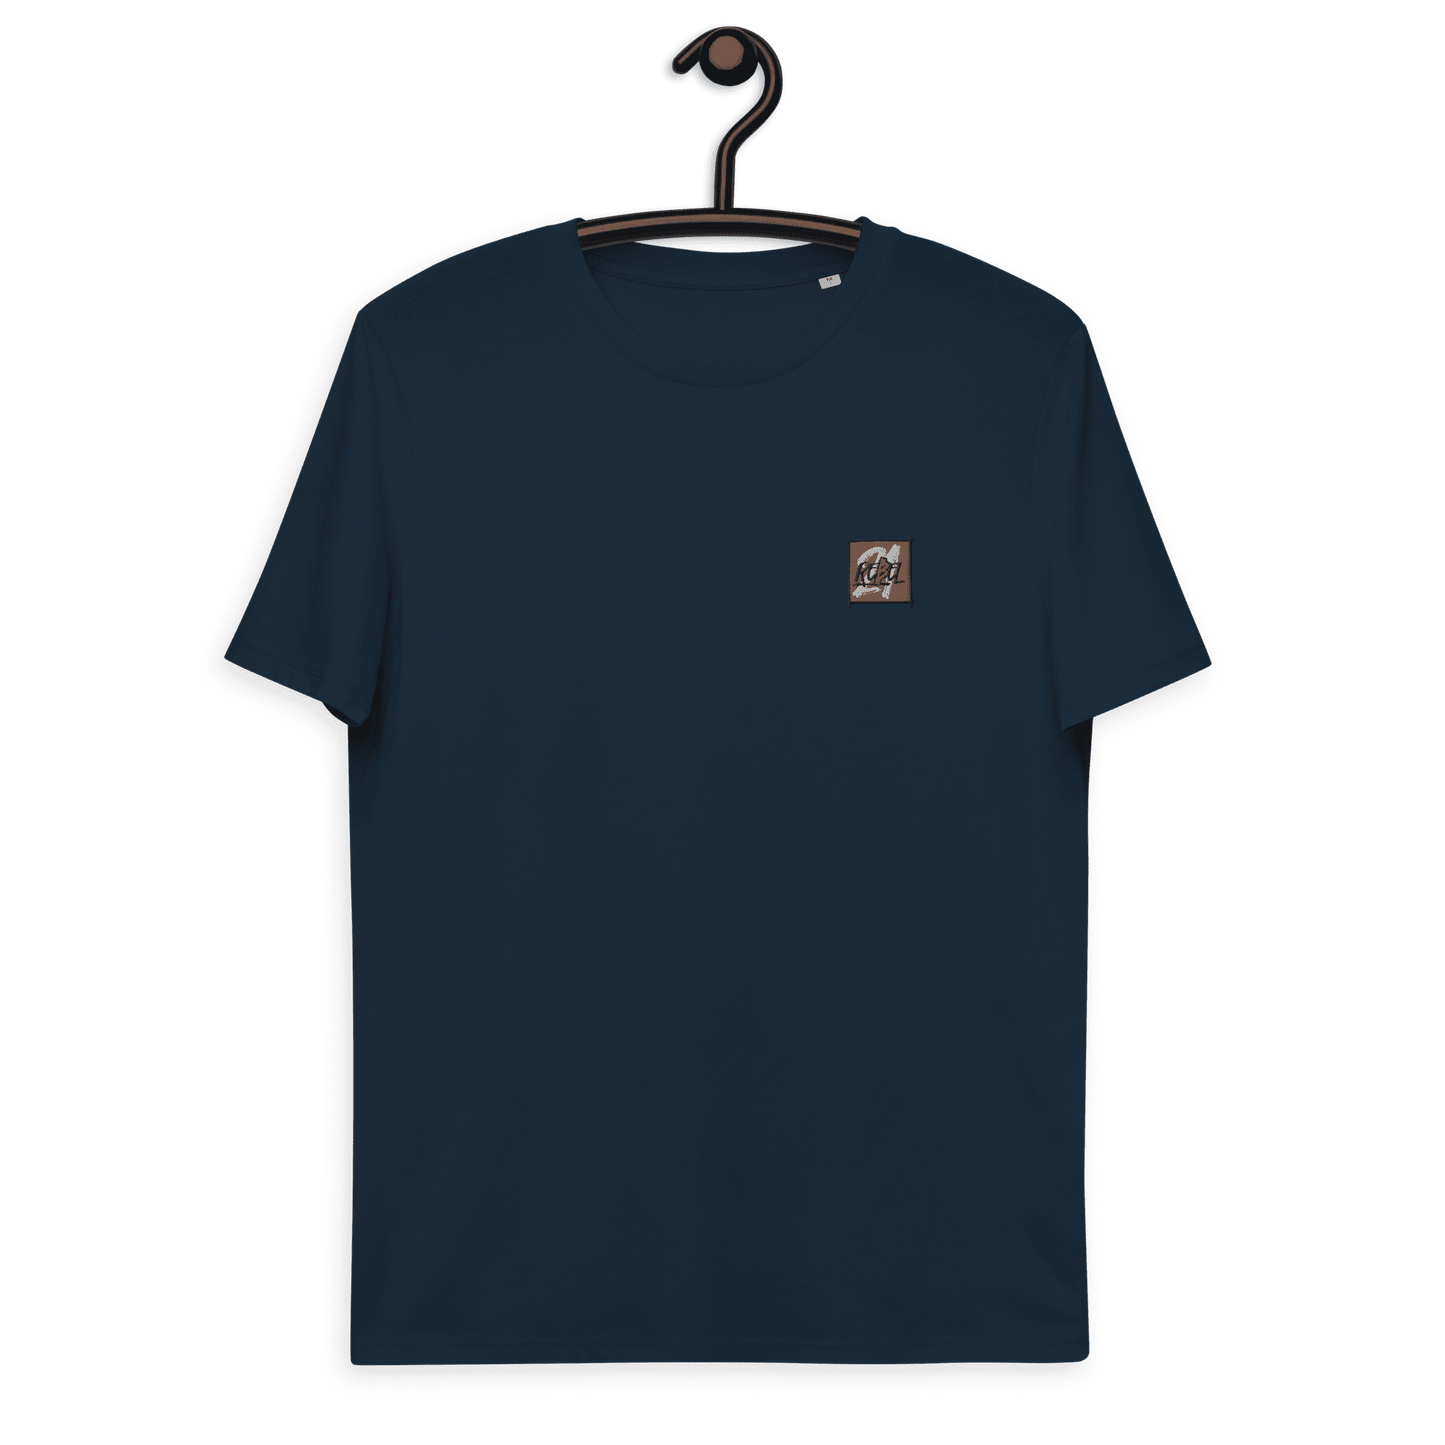 Front view of a navy colored embroidered bitcoin t-shirt.